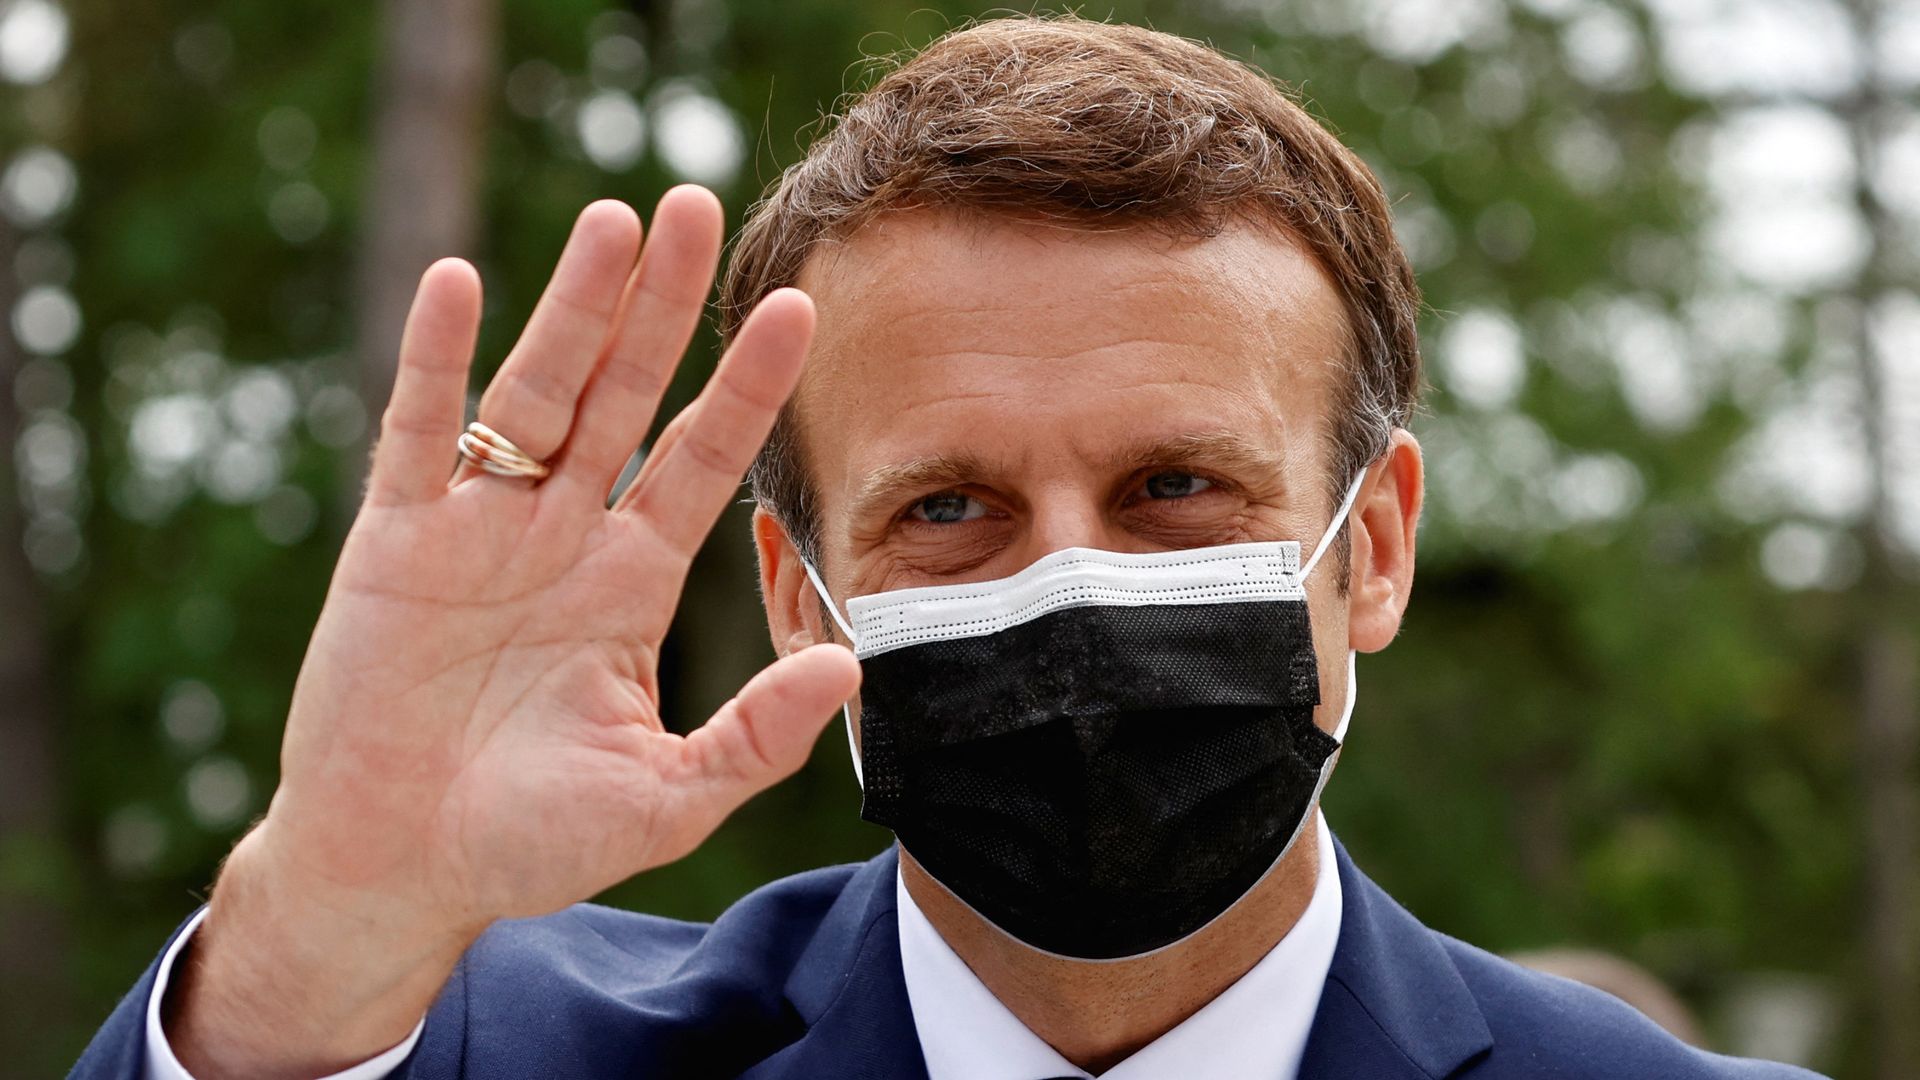 Emmanuel Macron, wearing a mask, waves as he visits a polling station in Le Touquet, during the first round of the French regional elections on June 20, 2021